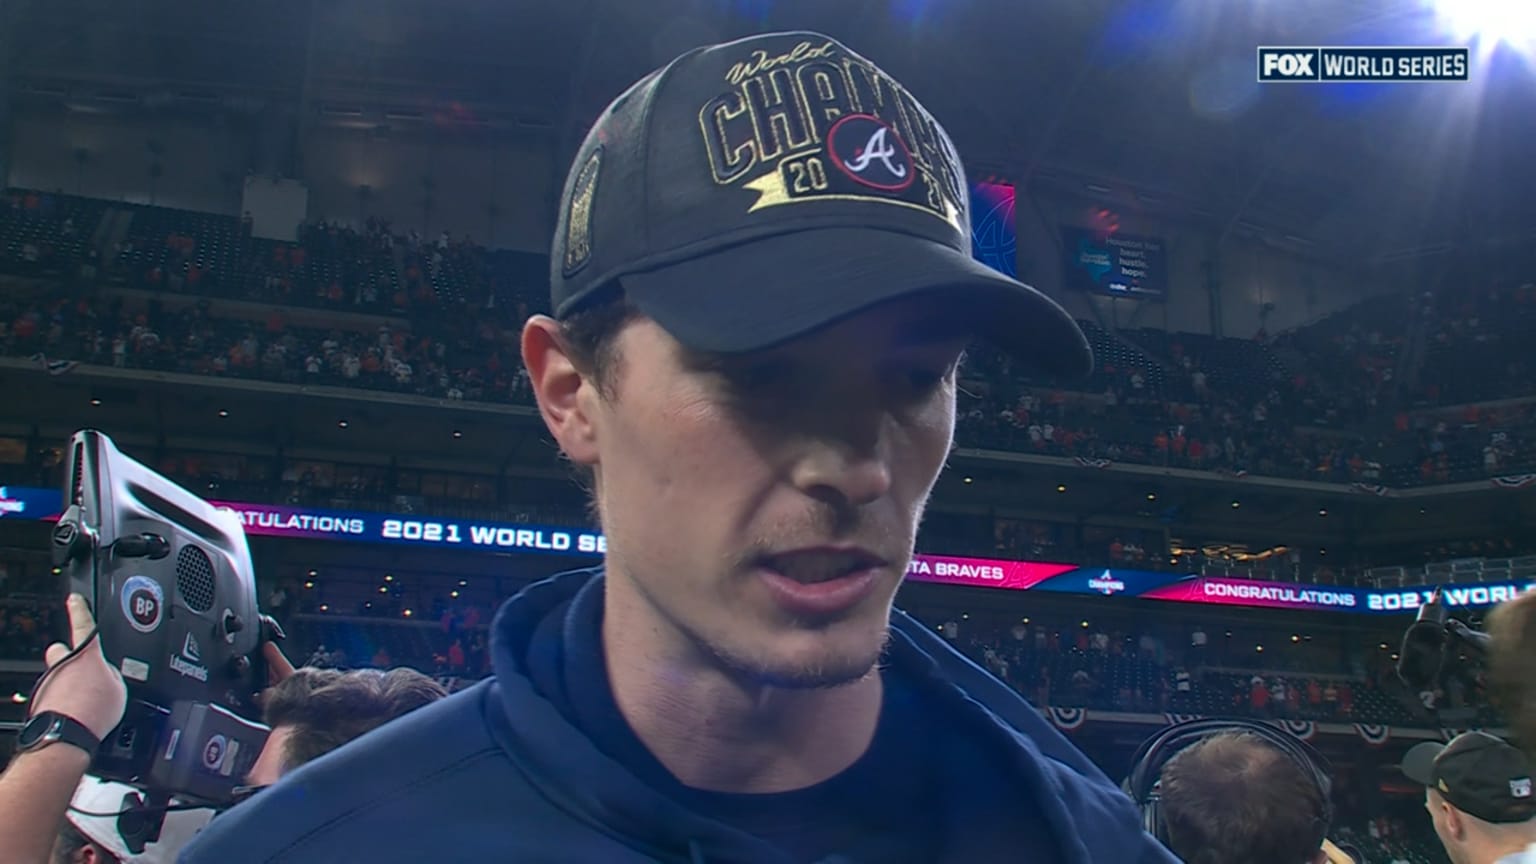 Max Fried on his Game 6 start, 11/02/2021